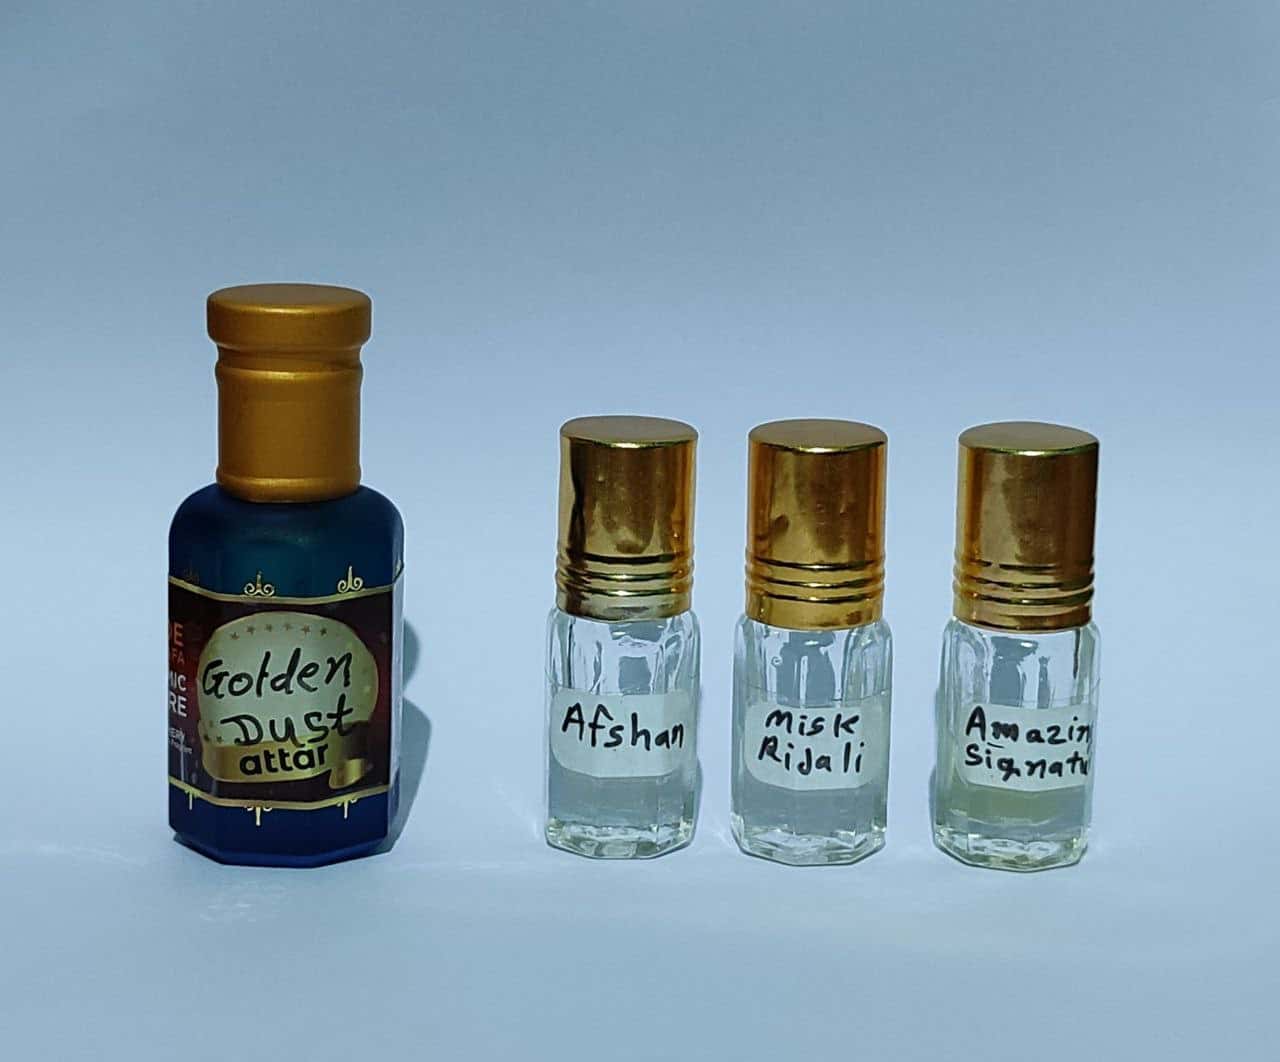 Golden Dust Premium Quality Attar Perfume (French Perfume) And 3 Sample Free By Abde Mustafa Store